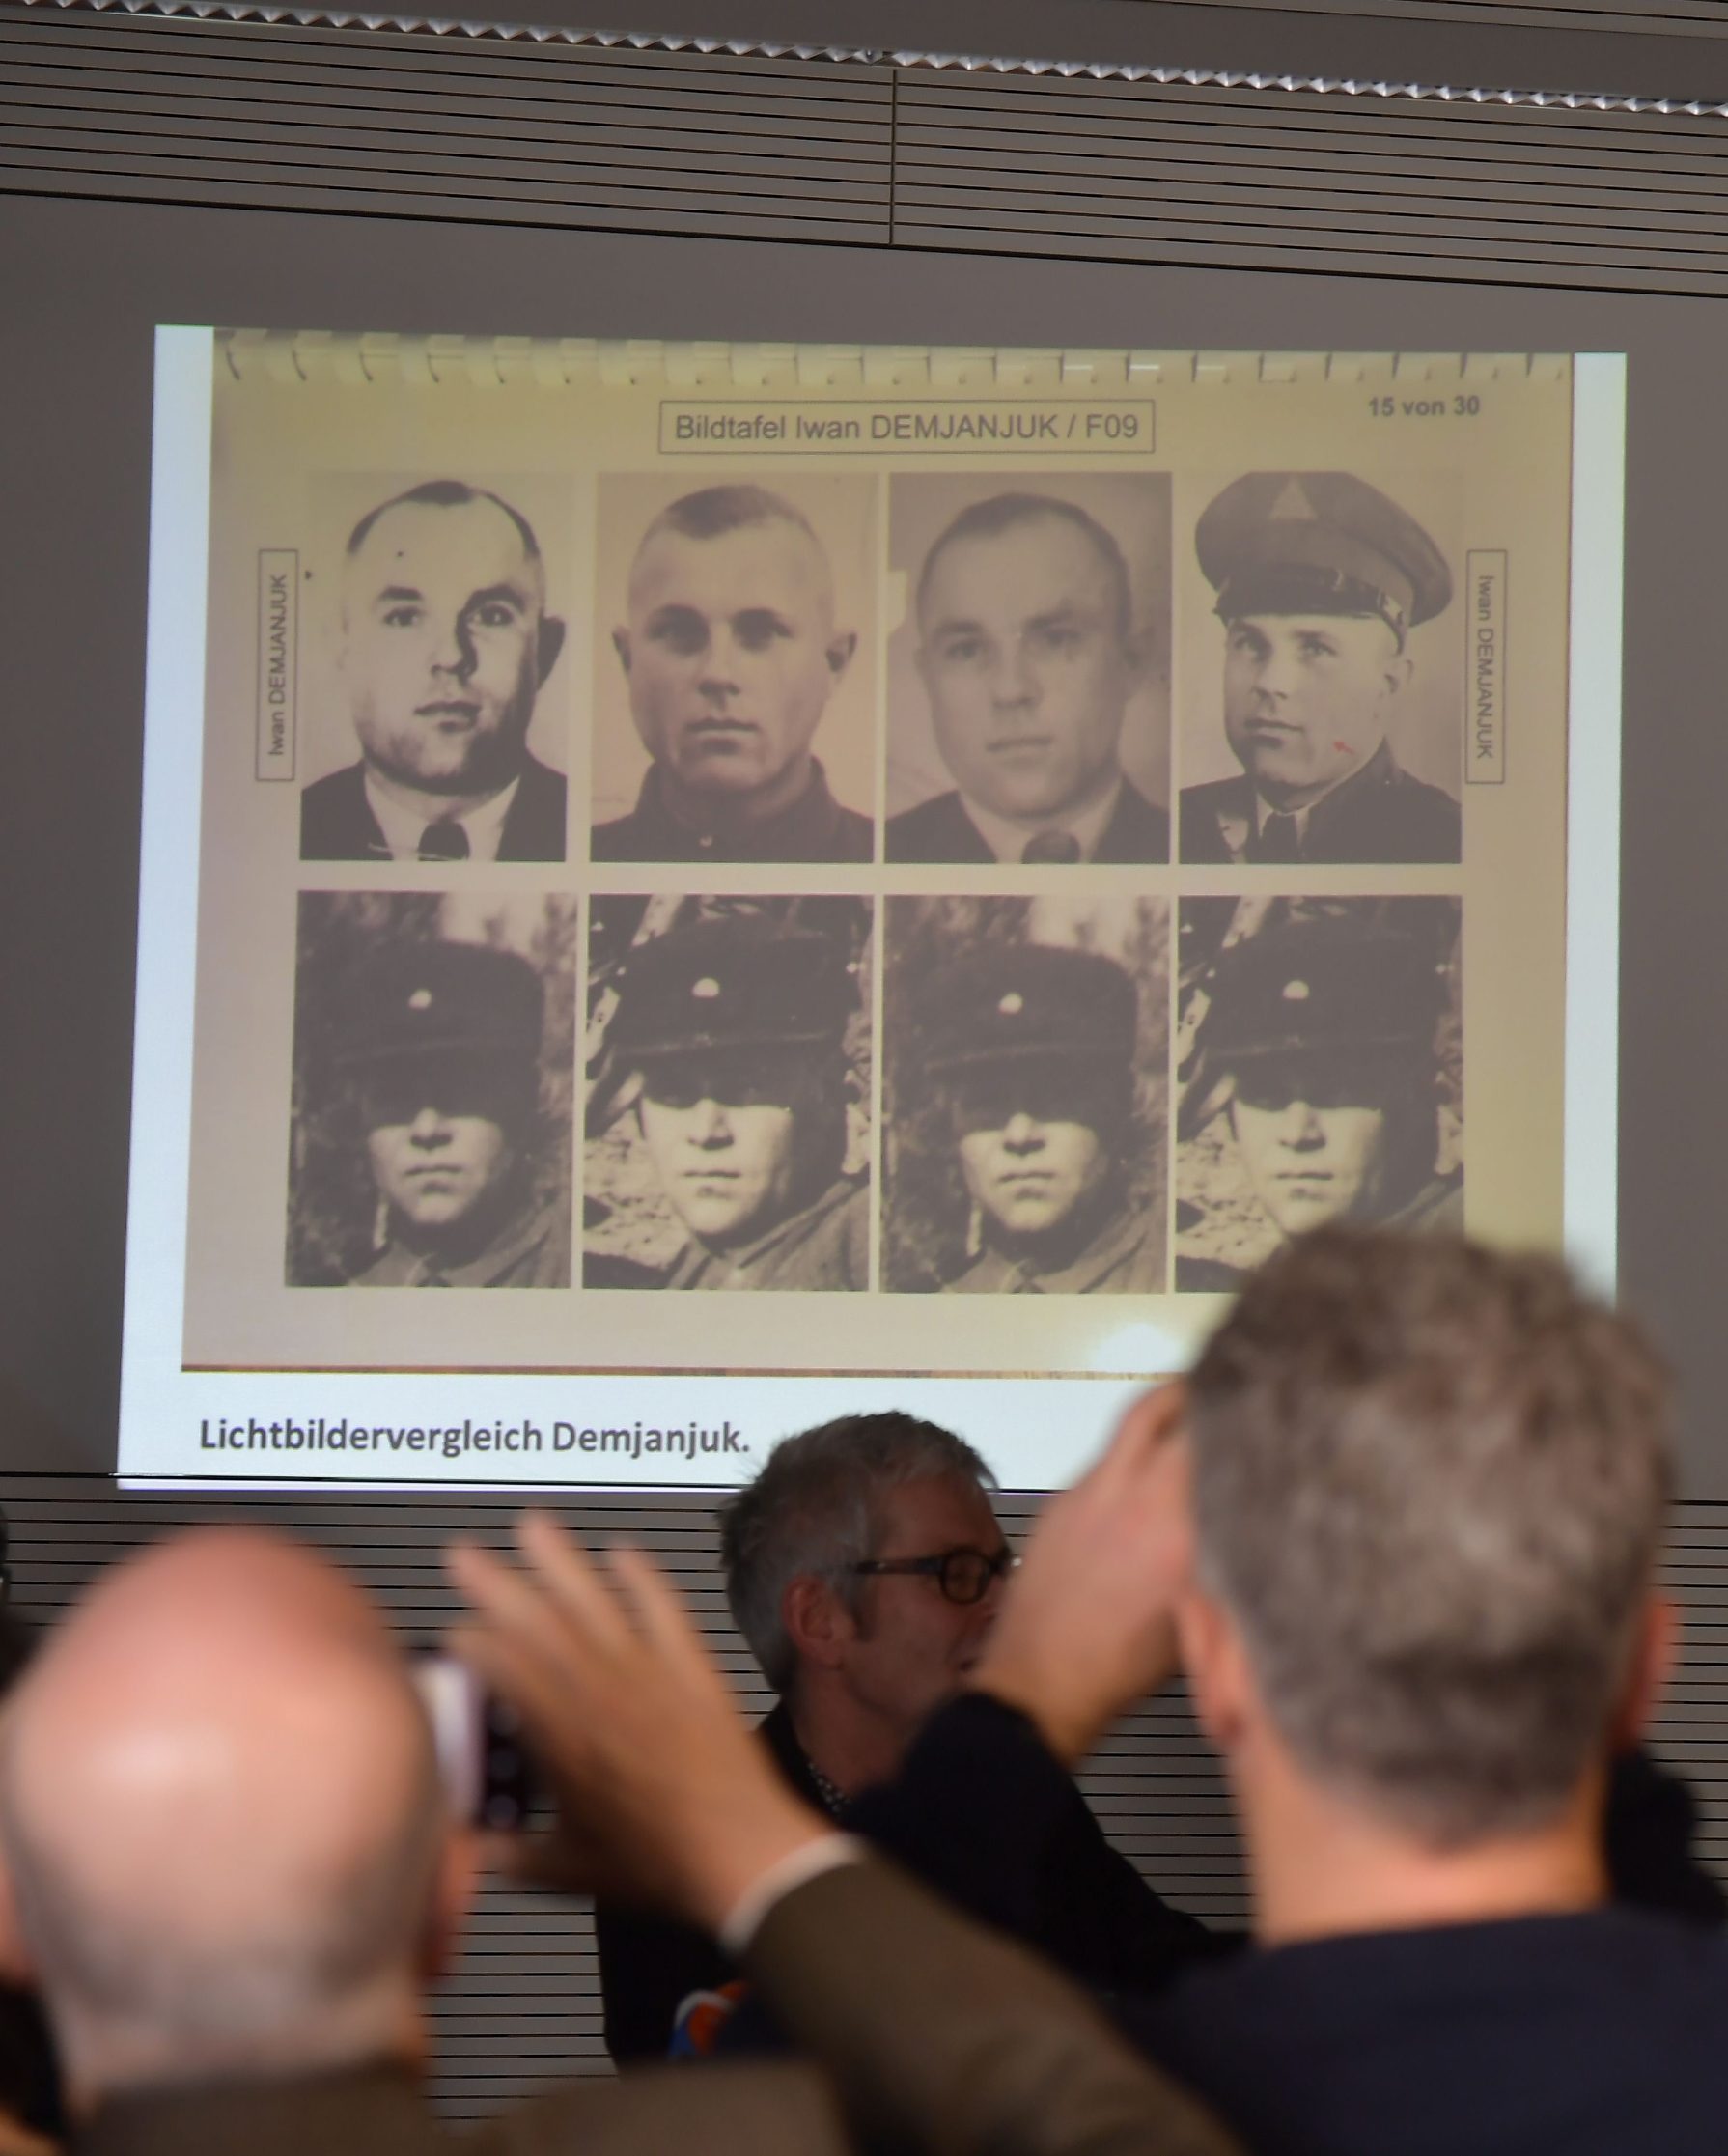 Photographs showing John Demjanjuk are displayed during a press conference on newly discovered photos from Sobibor Nazi death camp on January 28, 2020 in Berlin. - A Berlin museum said on January 20, 2020 that it had unpublished photographs showing former guard John Demjanjuk at the Sobibor extermination camp, where he has denied ever having been. (Photo by Tobias SCHWARZ / AFP)